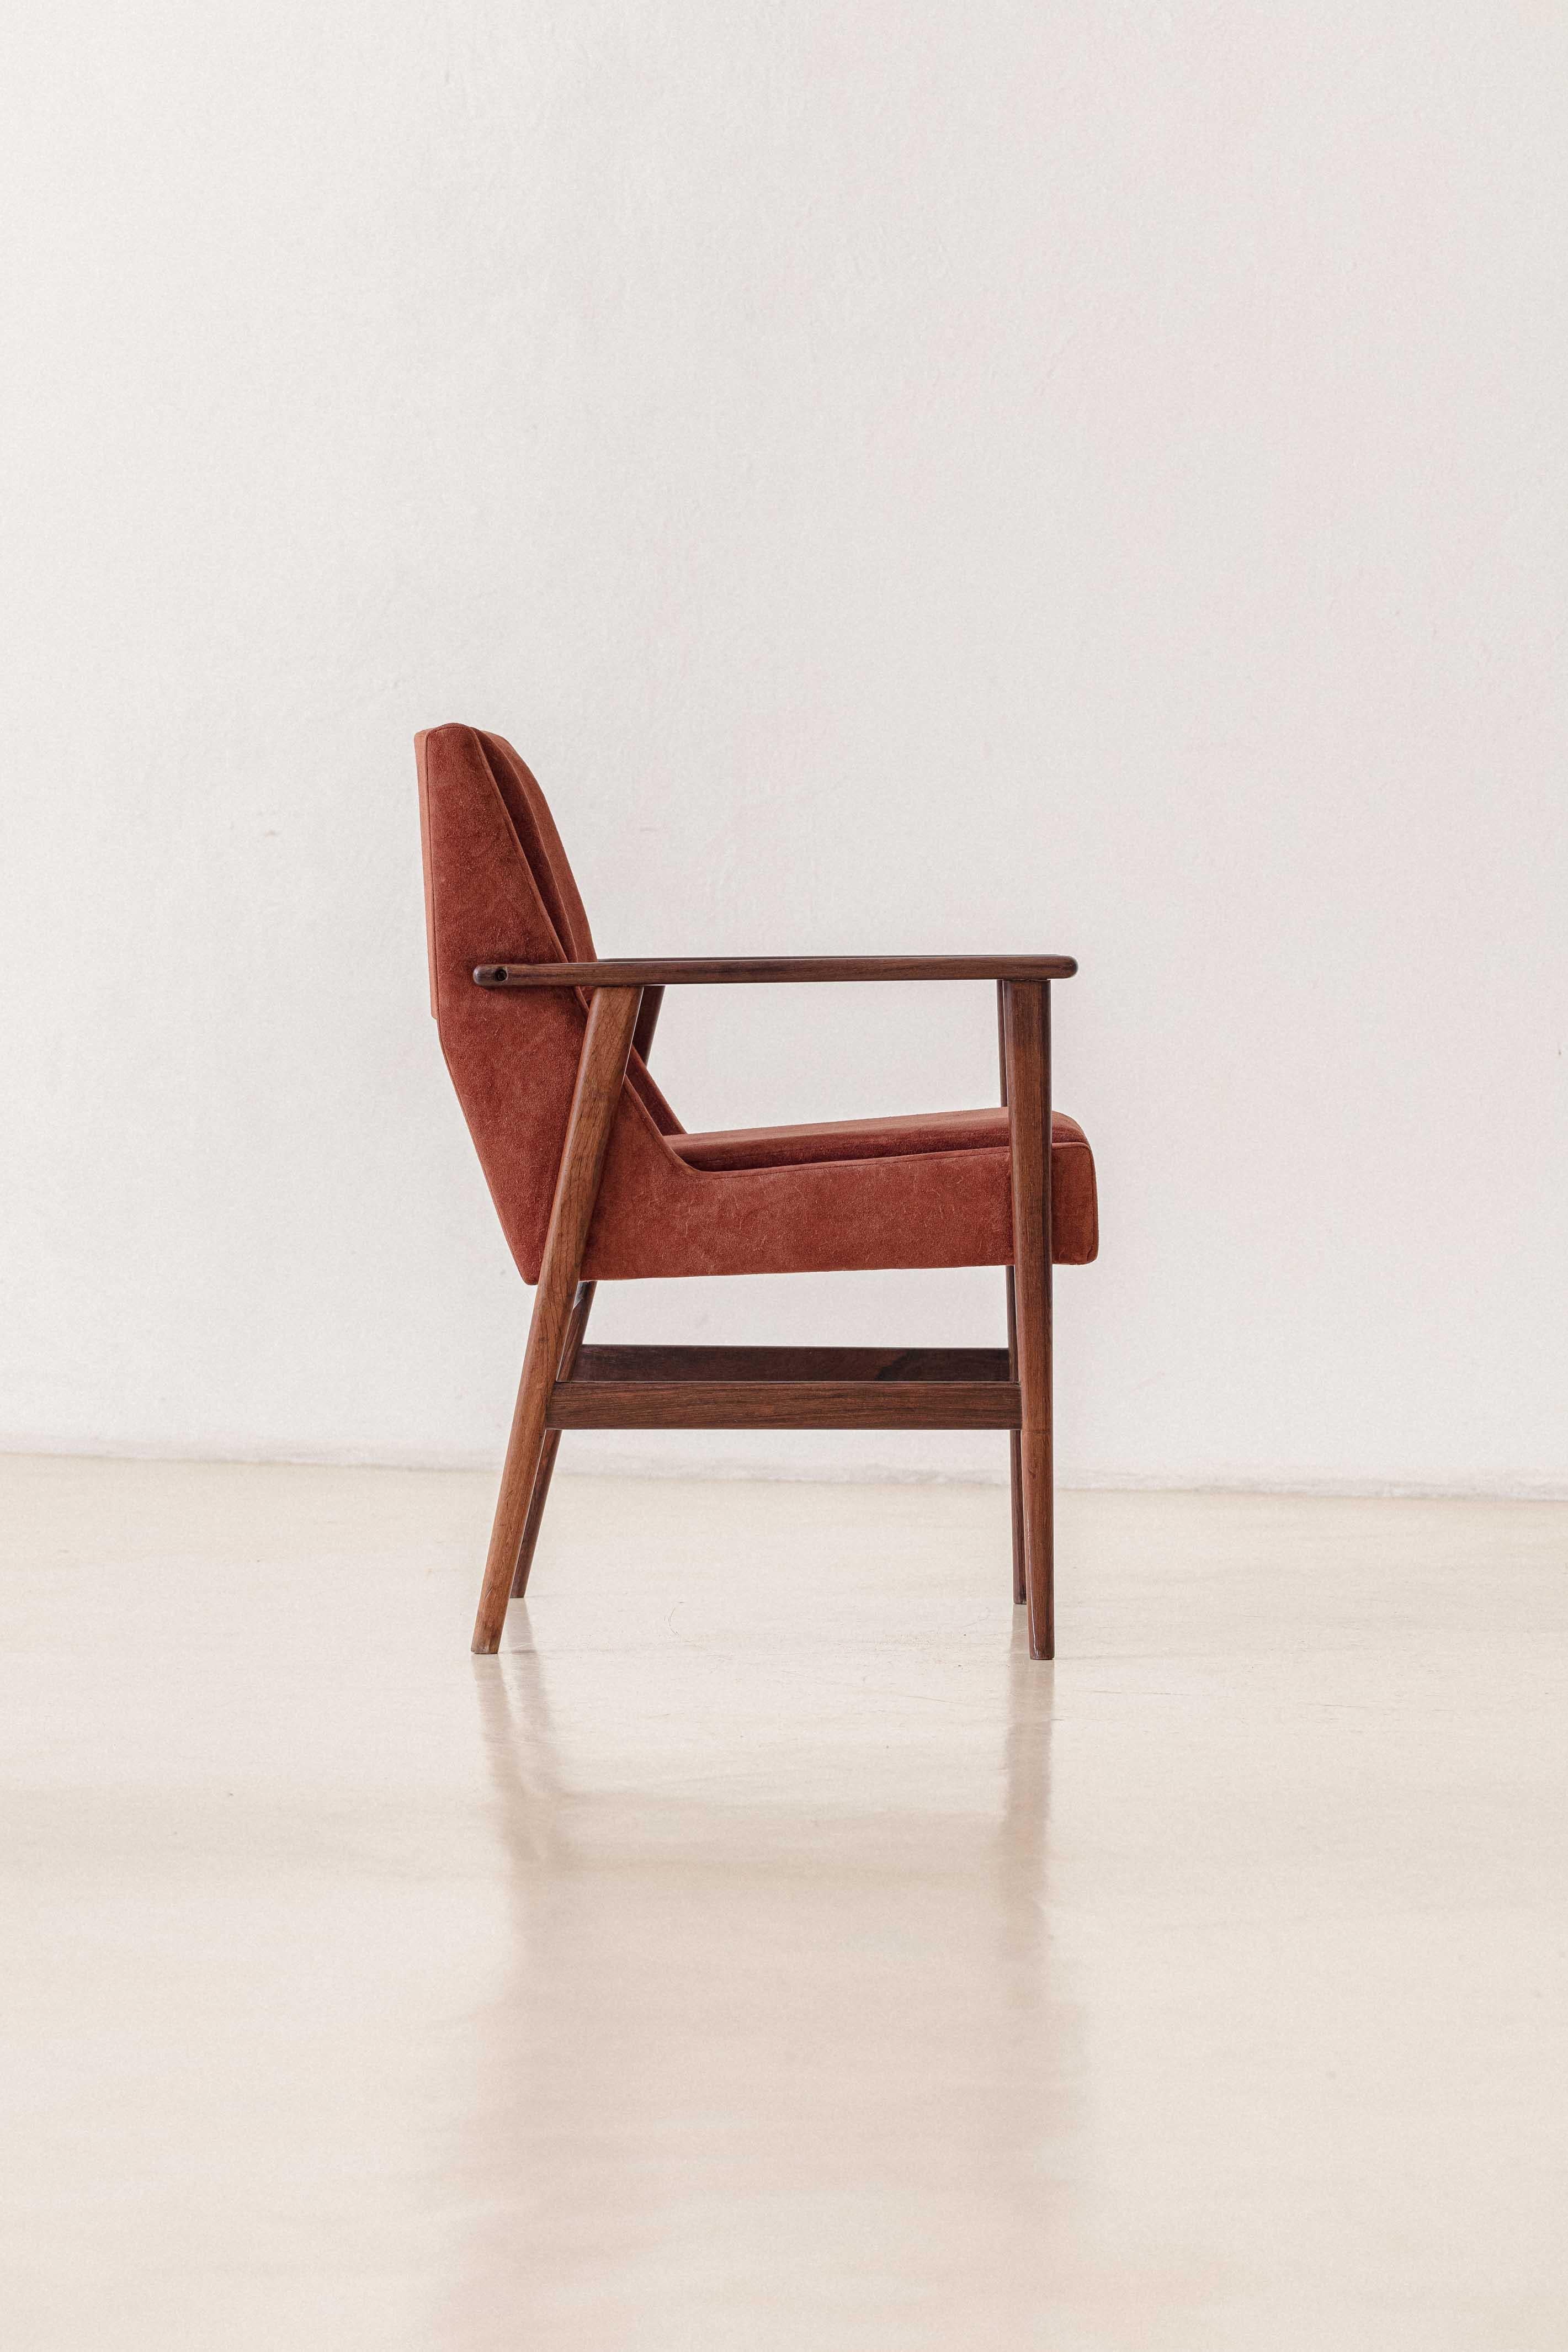 Mid-20th Century Rosewood Chair with Armrests by Móveis Cantù, 1960s, Brazilian, Midcentury For Sale